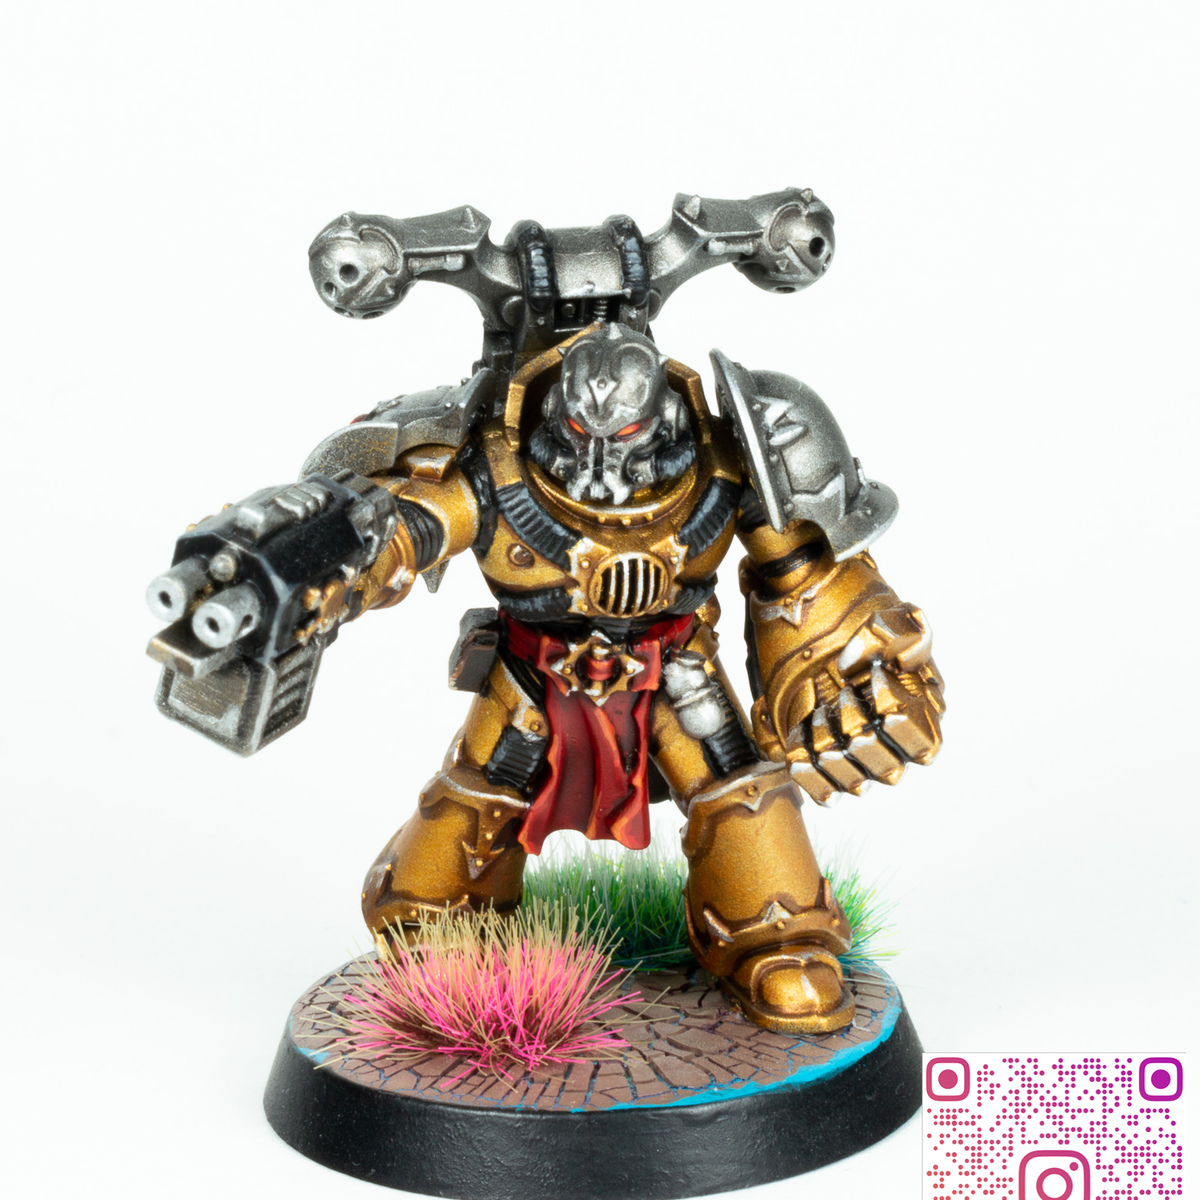 Dorn's Reclaimers (Corrupted)